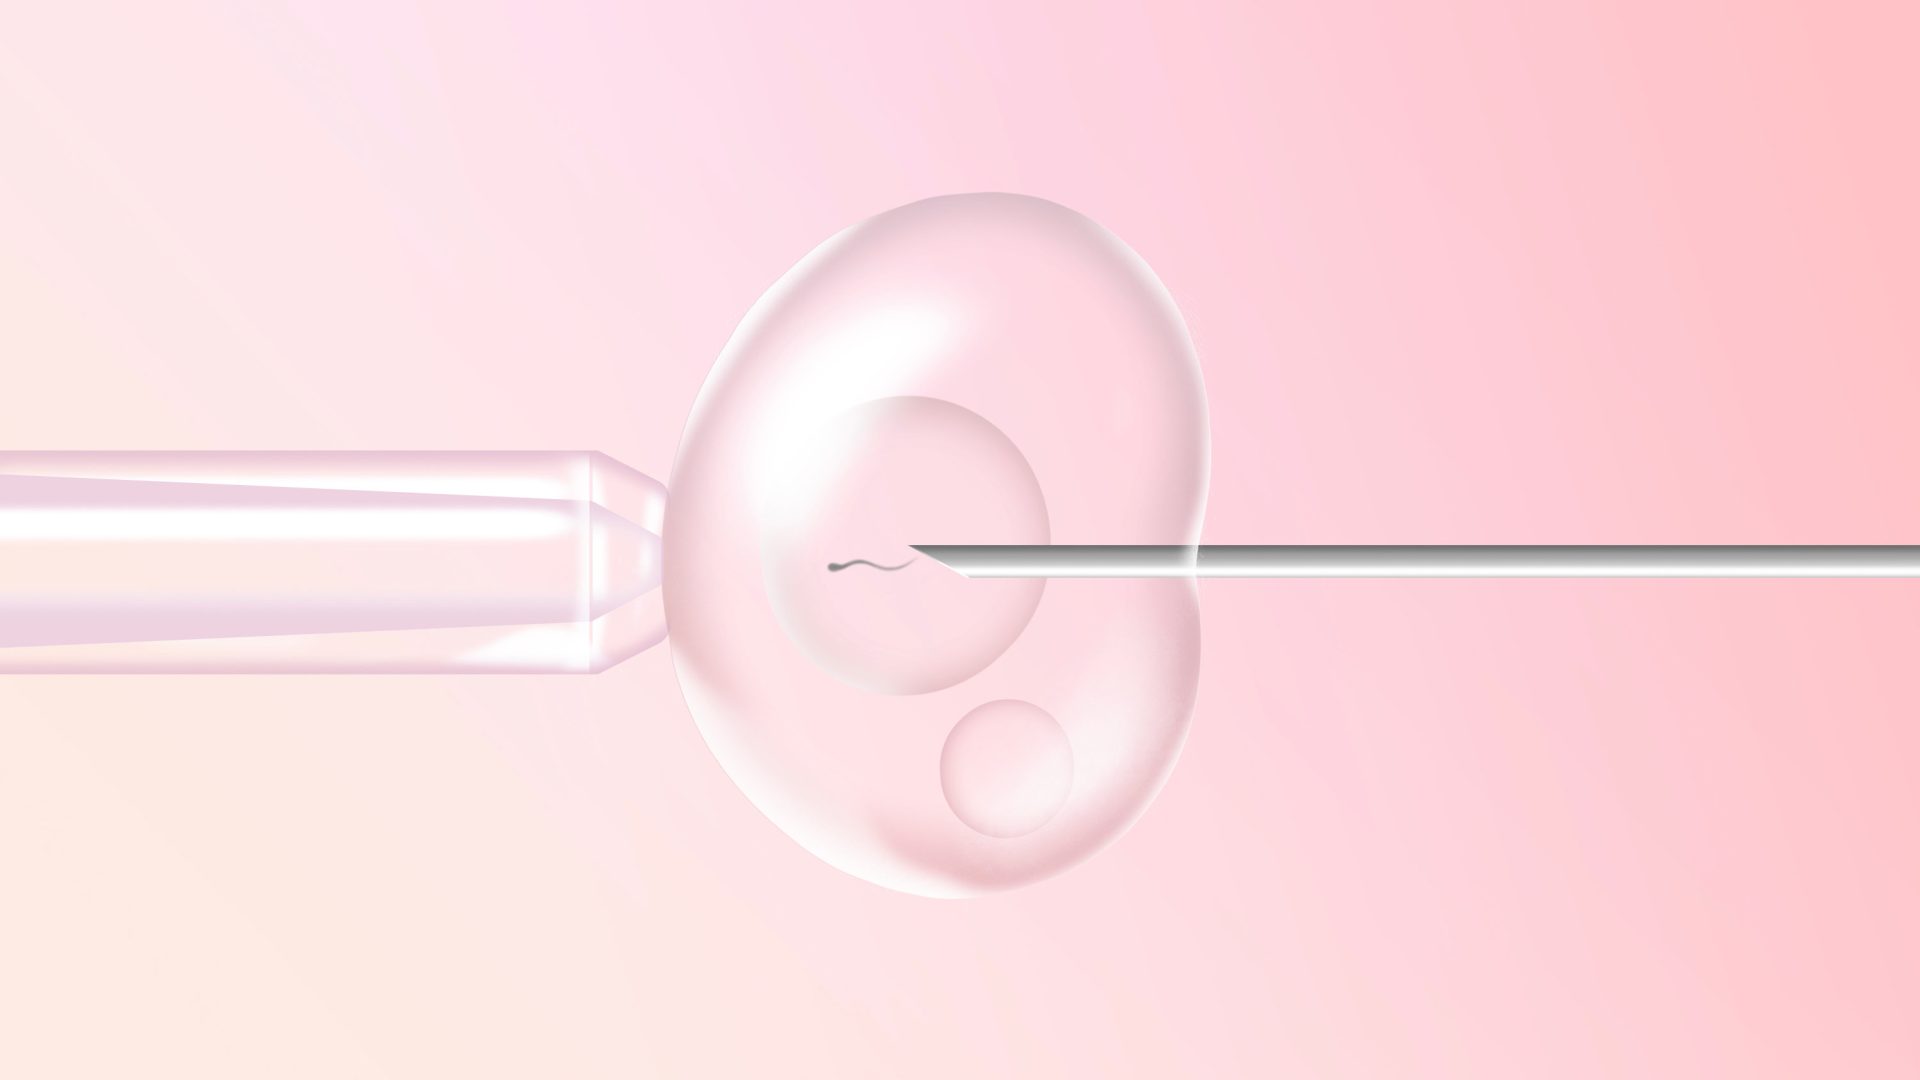 Why You Should Consider an IVF Clinic for Your Fertility Treatment